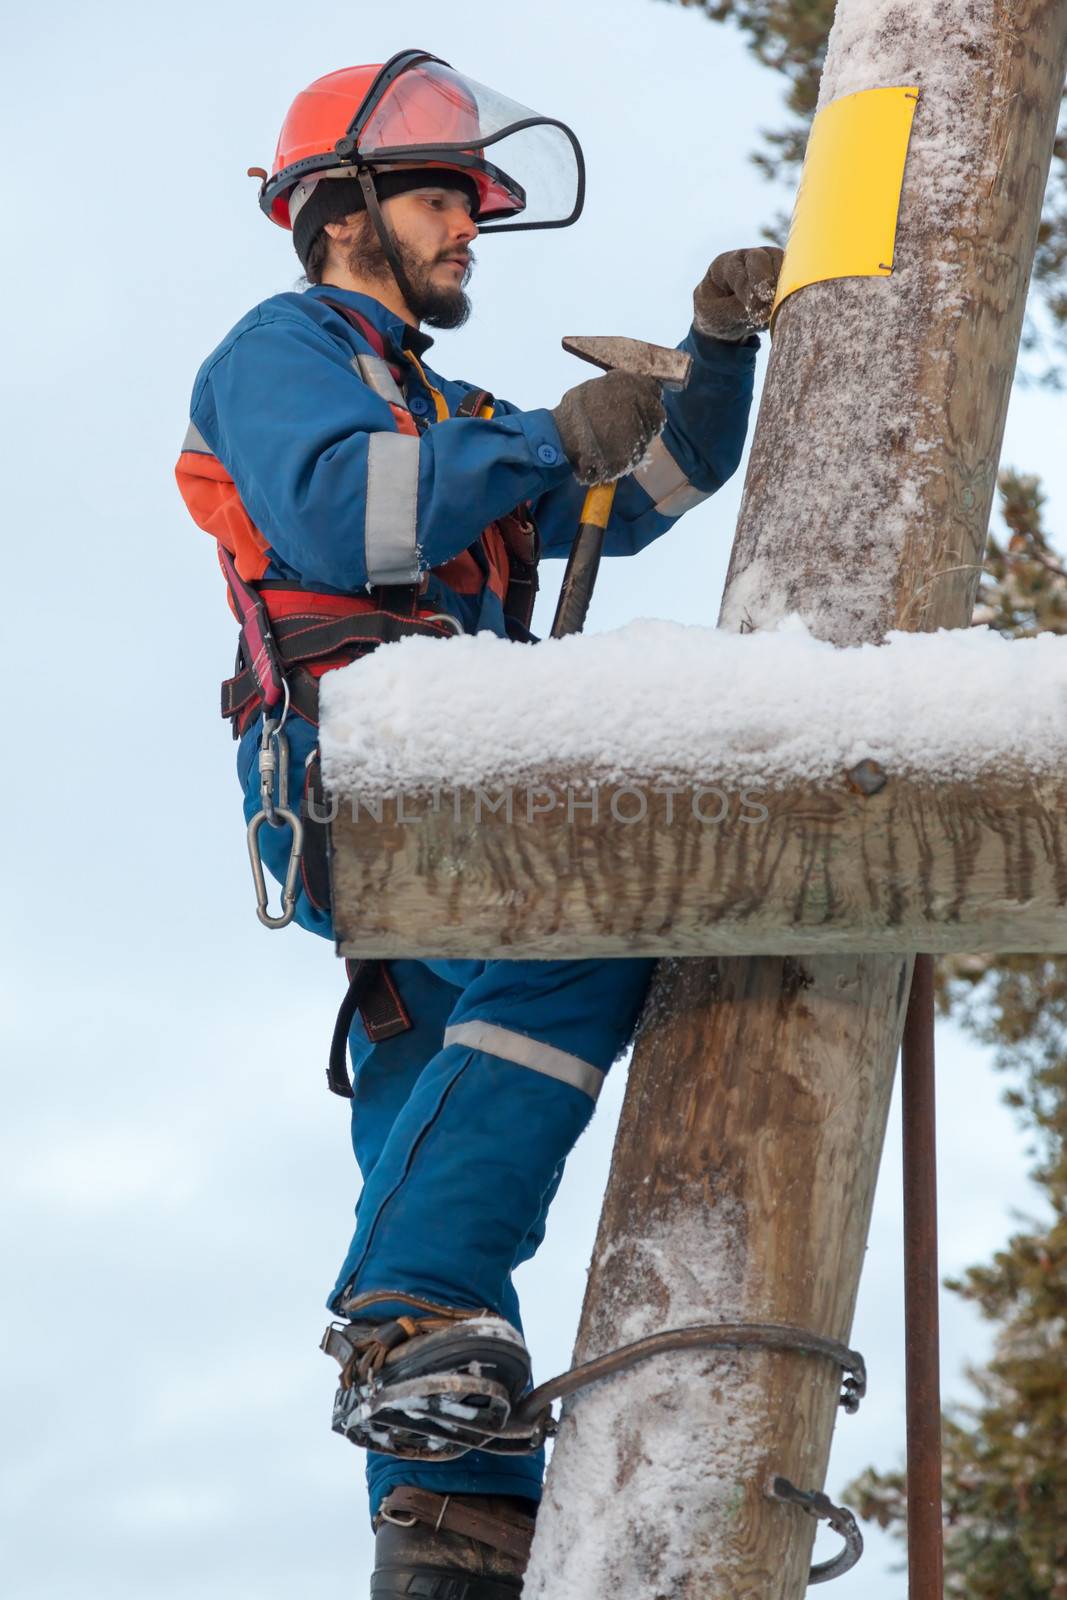 Electrician in blue overalls working on a power line pole in winter